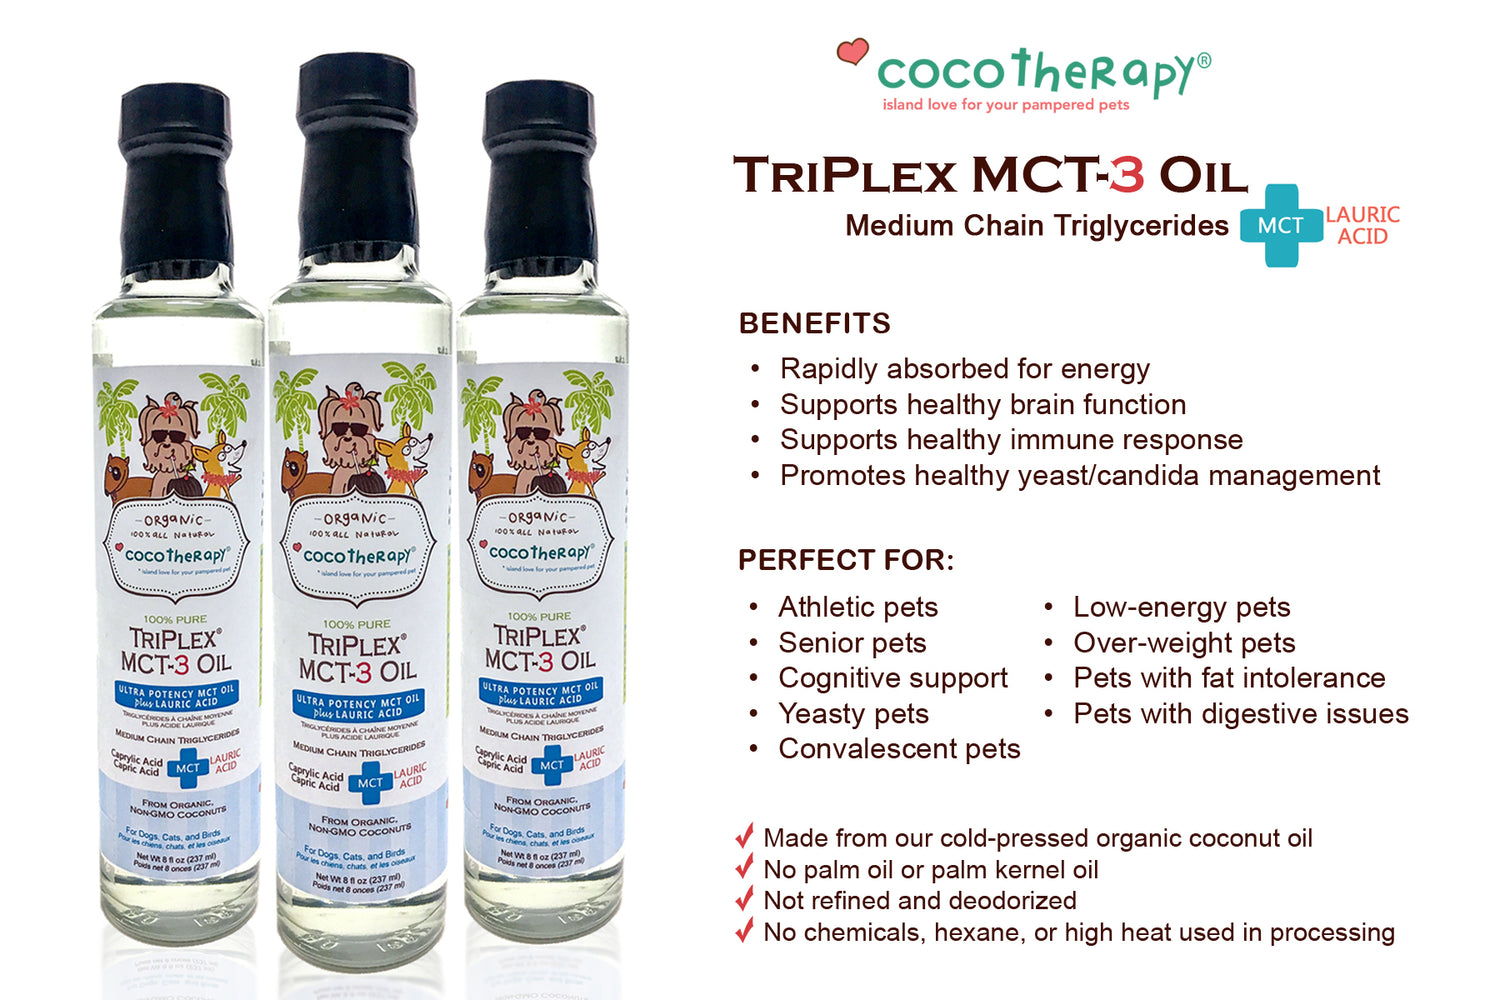 What is CocoTherapy TriPlex™ MCT-3 Oil?